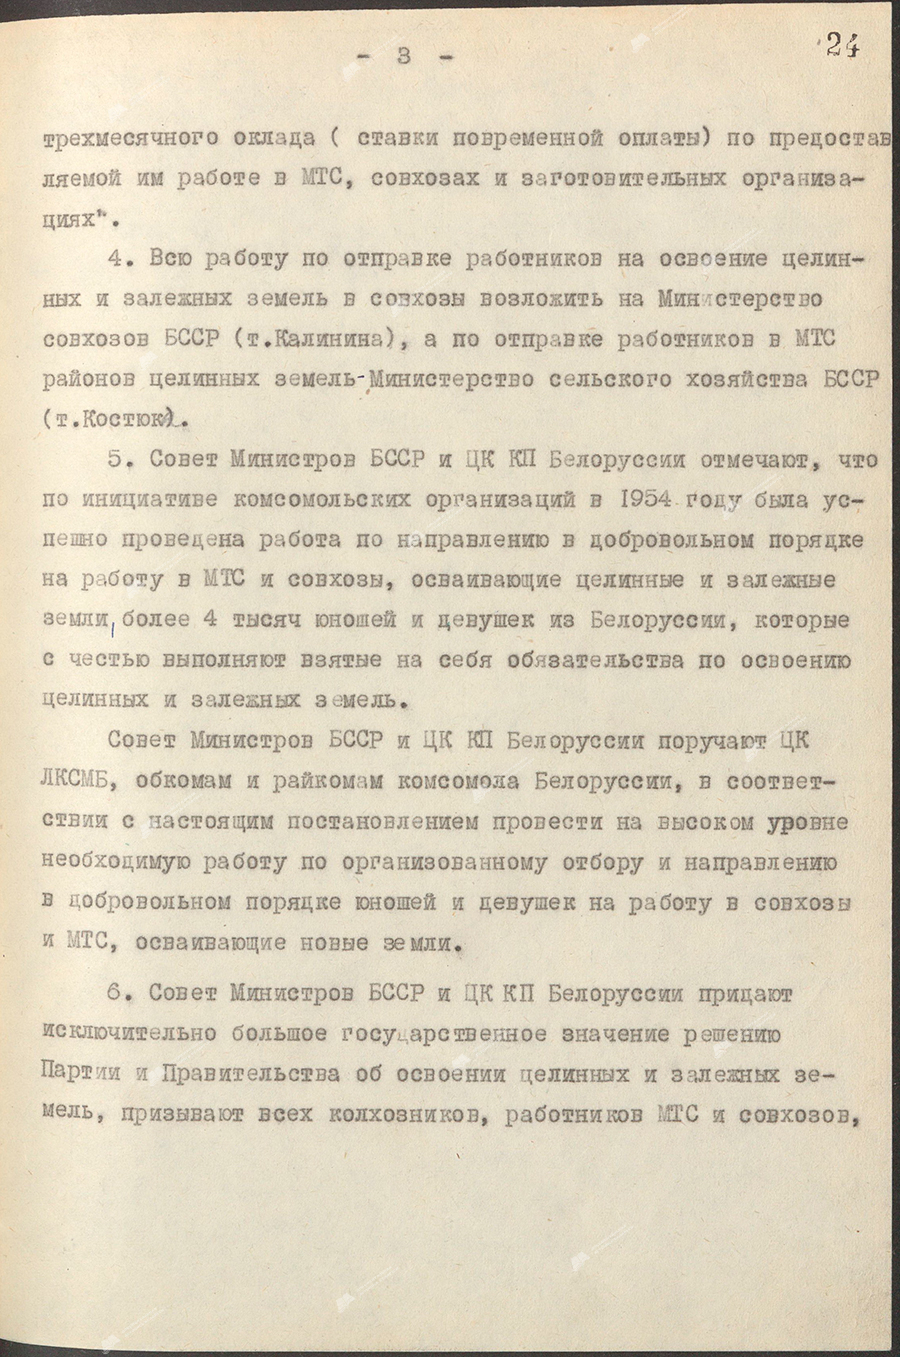 Resolution No. 5 of the Council of Ministers of the BSSR and the Central Committee of the Communist Party of Belarus «On the selection and assignment of workers, engineering and technical workers and employees to work in MTS and state farms in the areas of development of virgin and fallow lands of the RSFSR and Kazakhstan»-с. 2